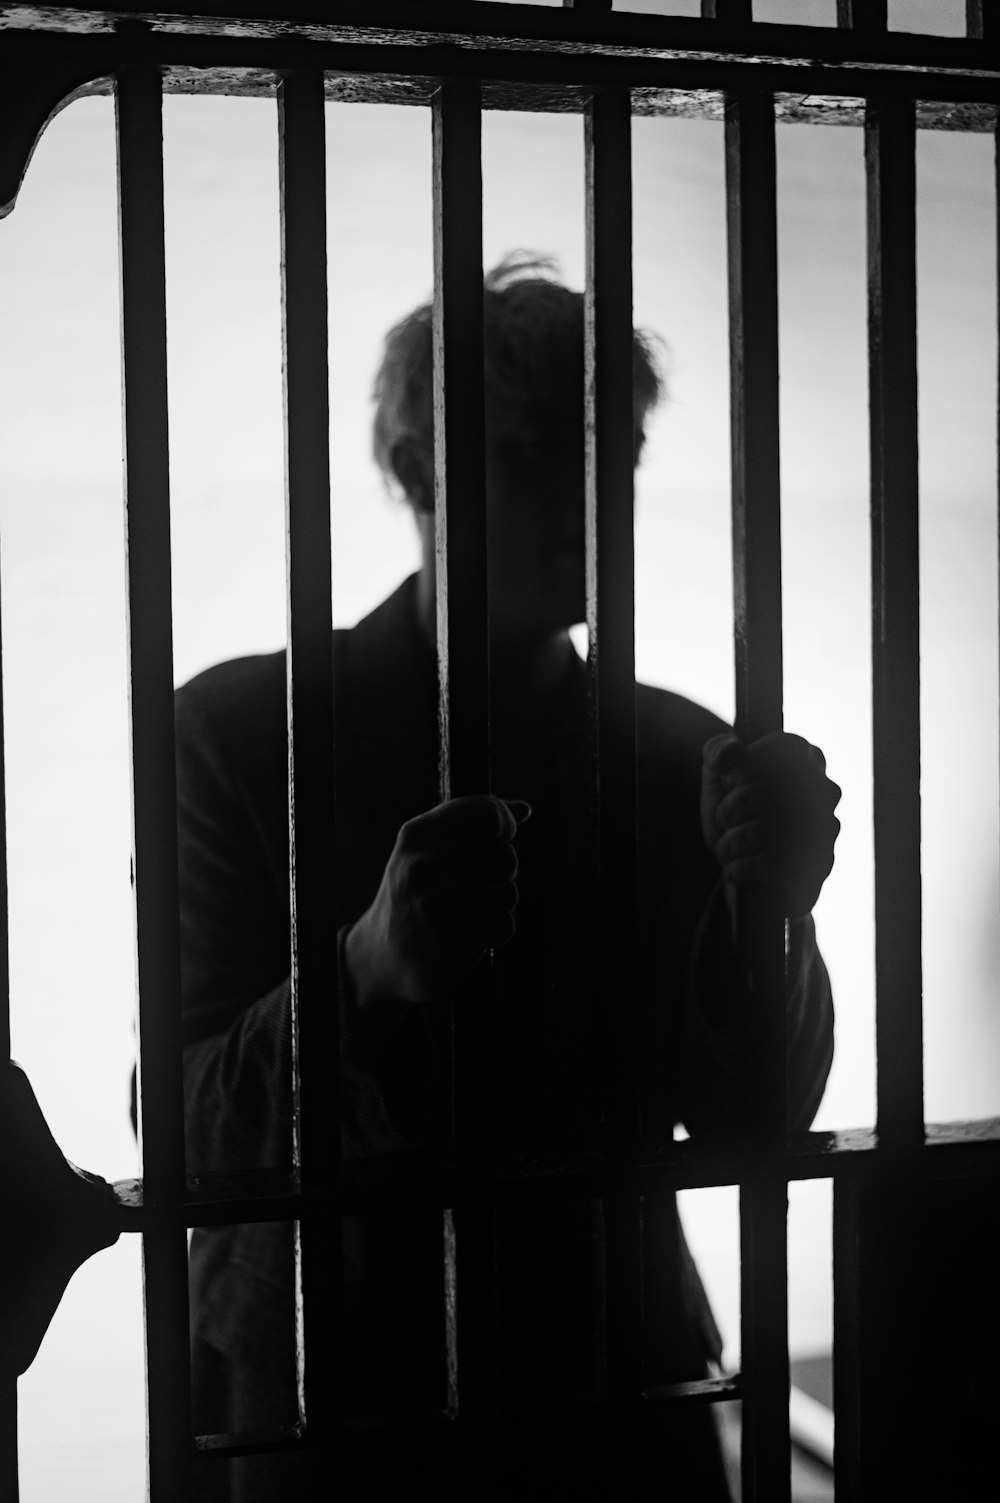 a man standing behind bars in a jail cell